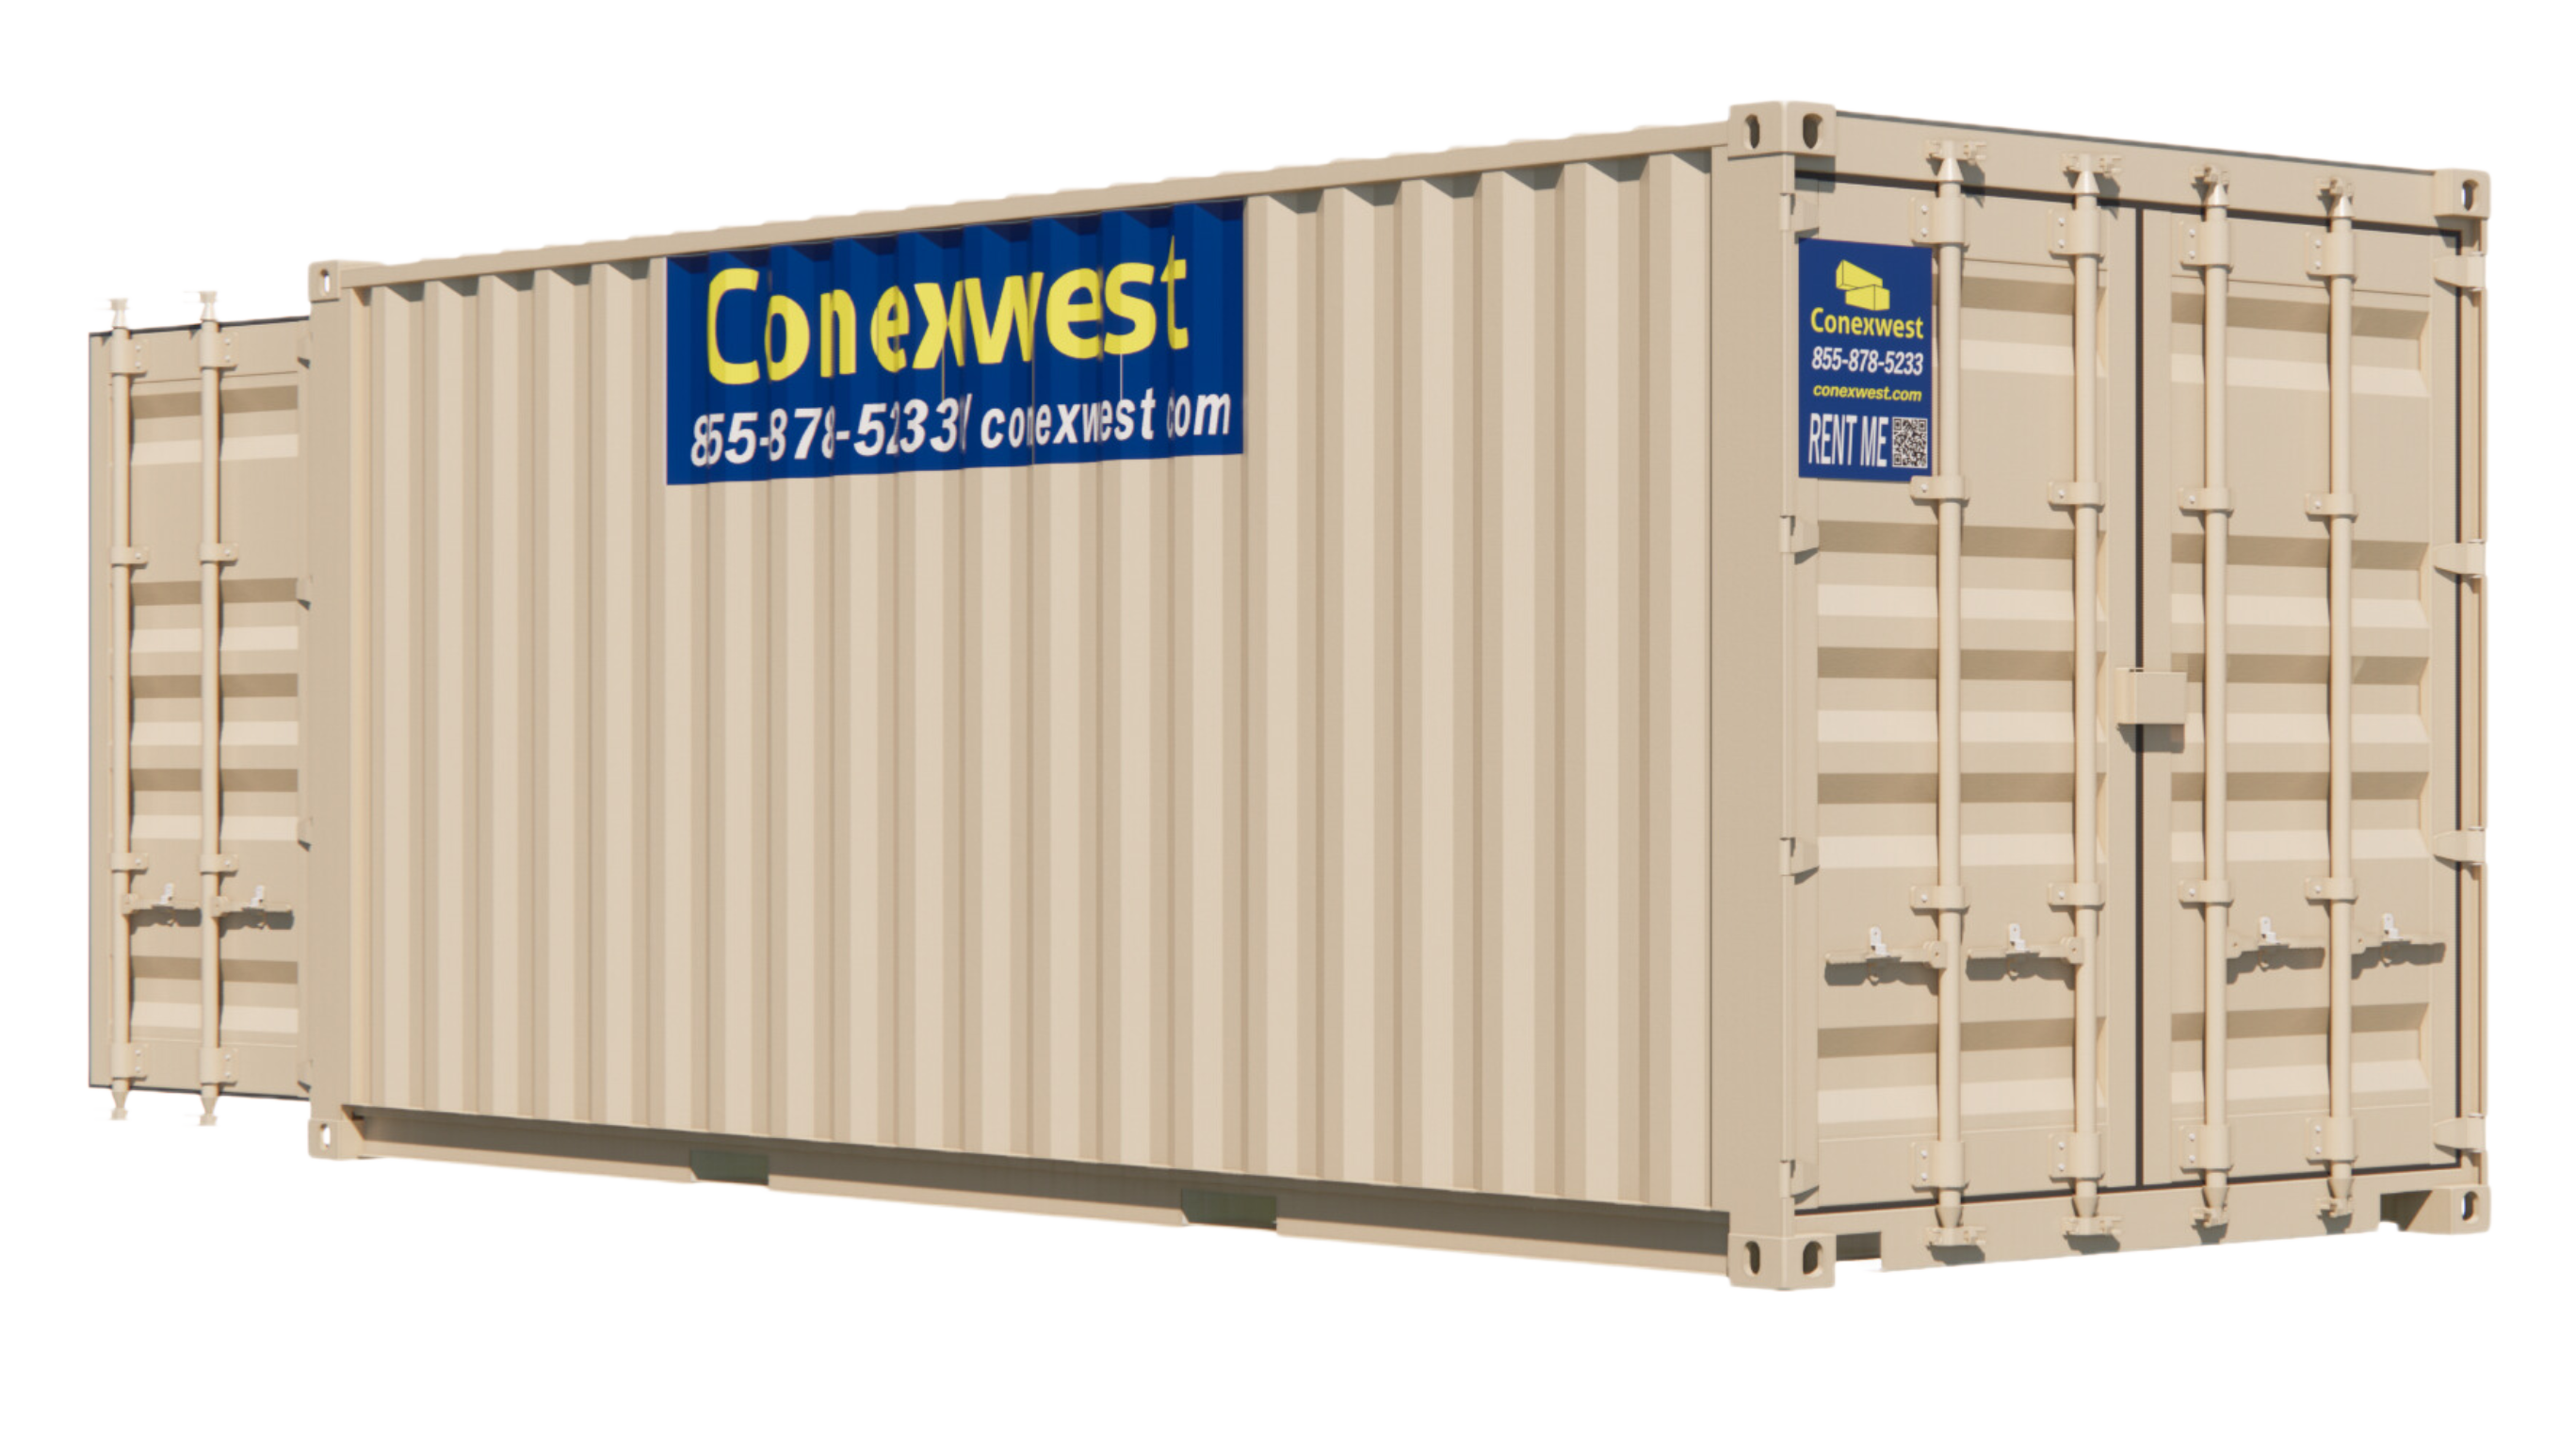 20ft storage container with cargo doors on both ends for rent